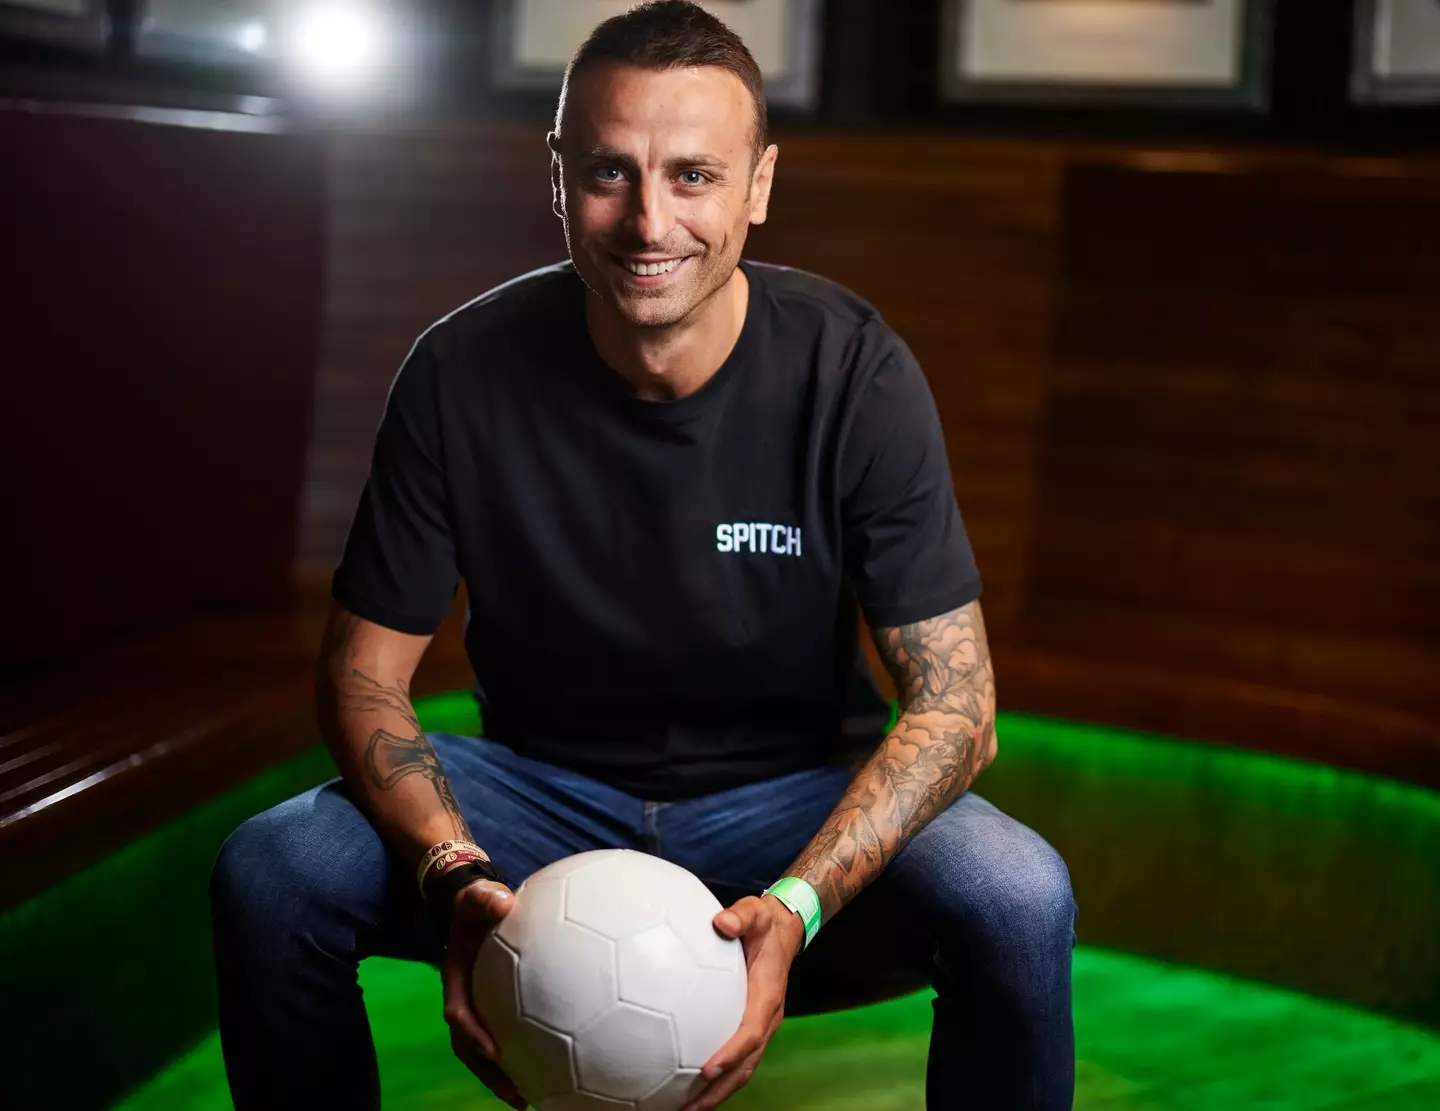 Berbatov was speaking at the UK launch of fantasy football app SPITCH. (Image